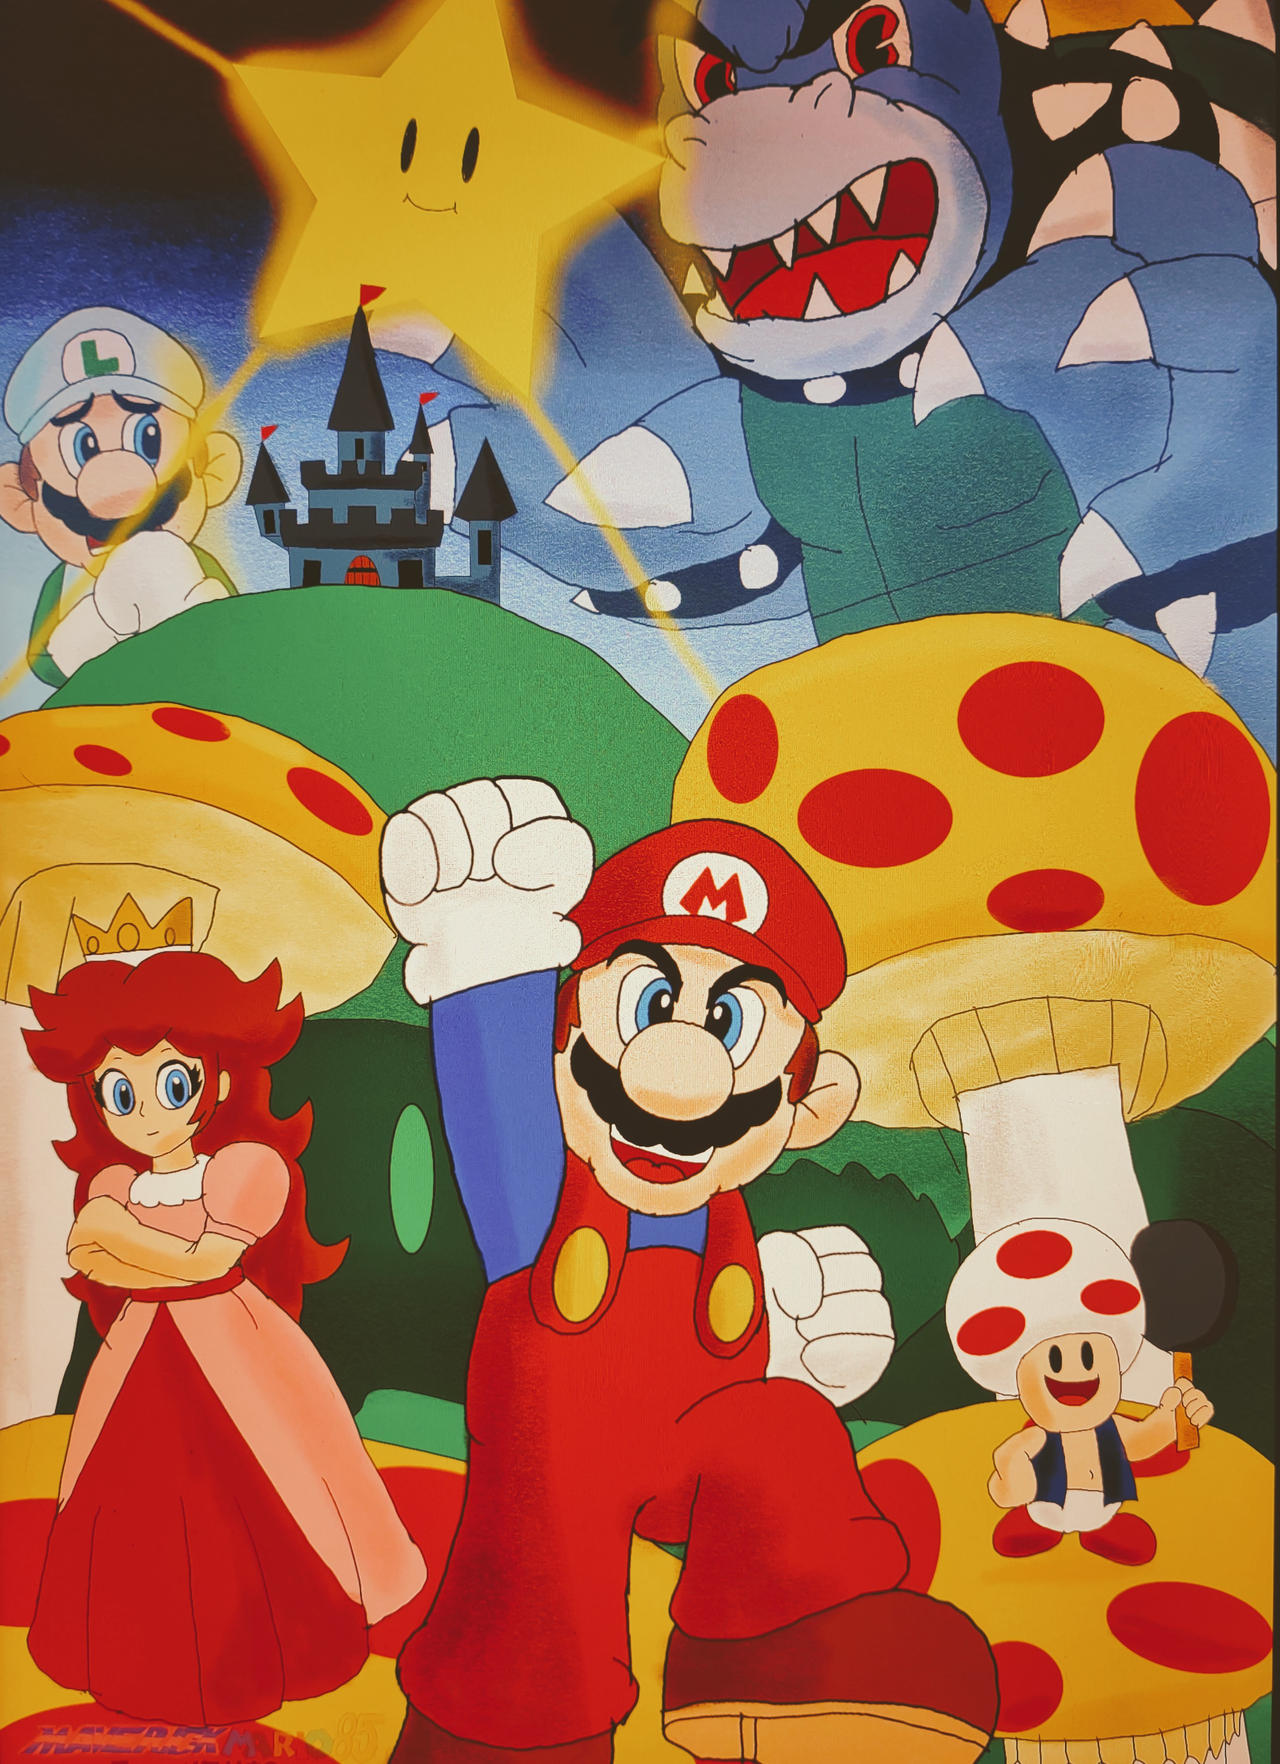 Super Mario Bros Movie Video Game PS4 by BeastUnleashed4Real on DeviantArt